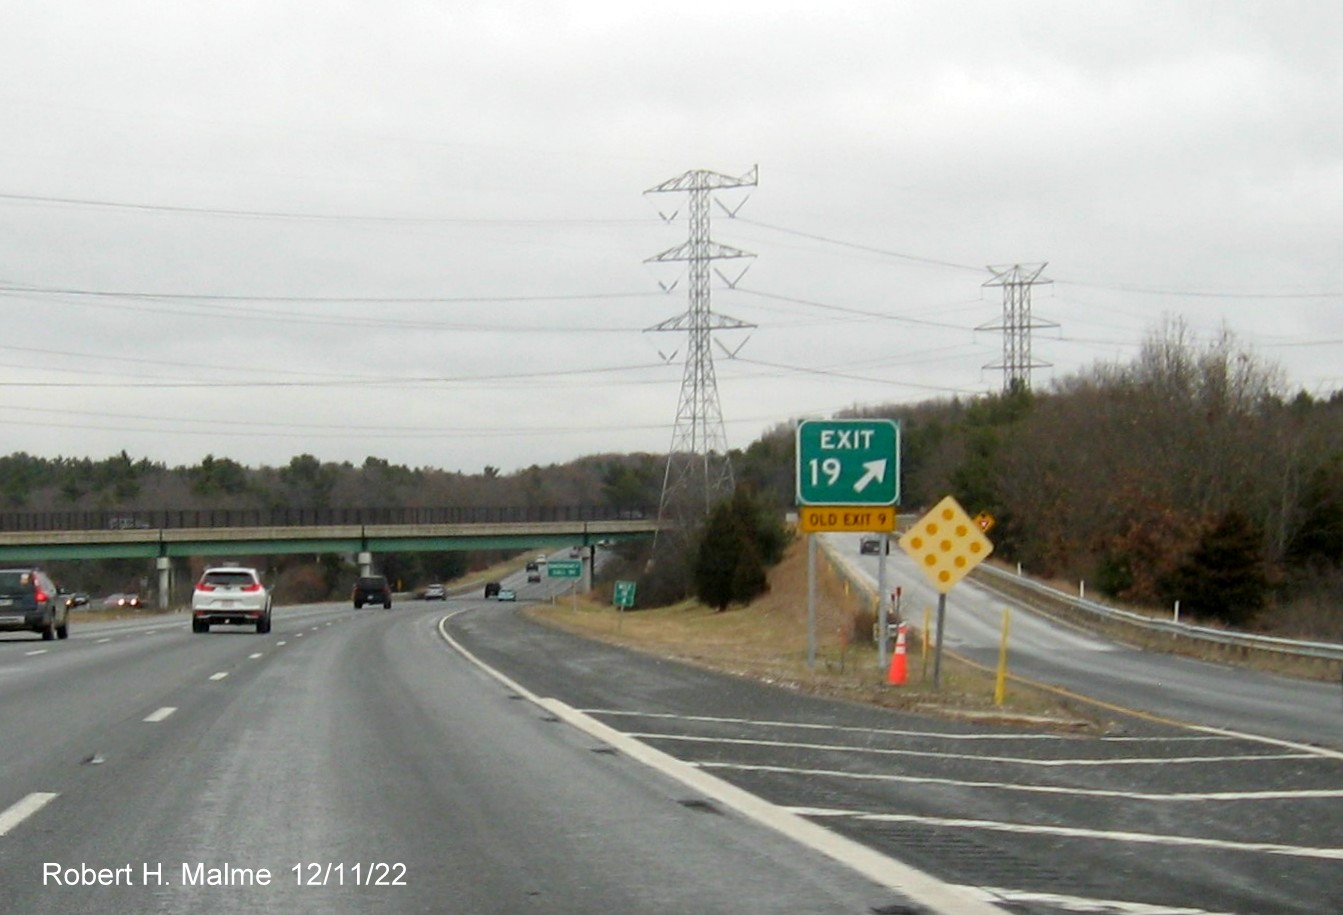 Image of newly placed gore sign for US 1 to MA 27 exit on I-95 North in Walpole, December 2022